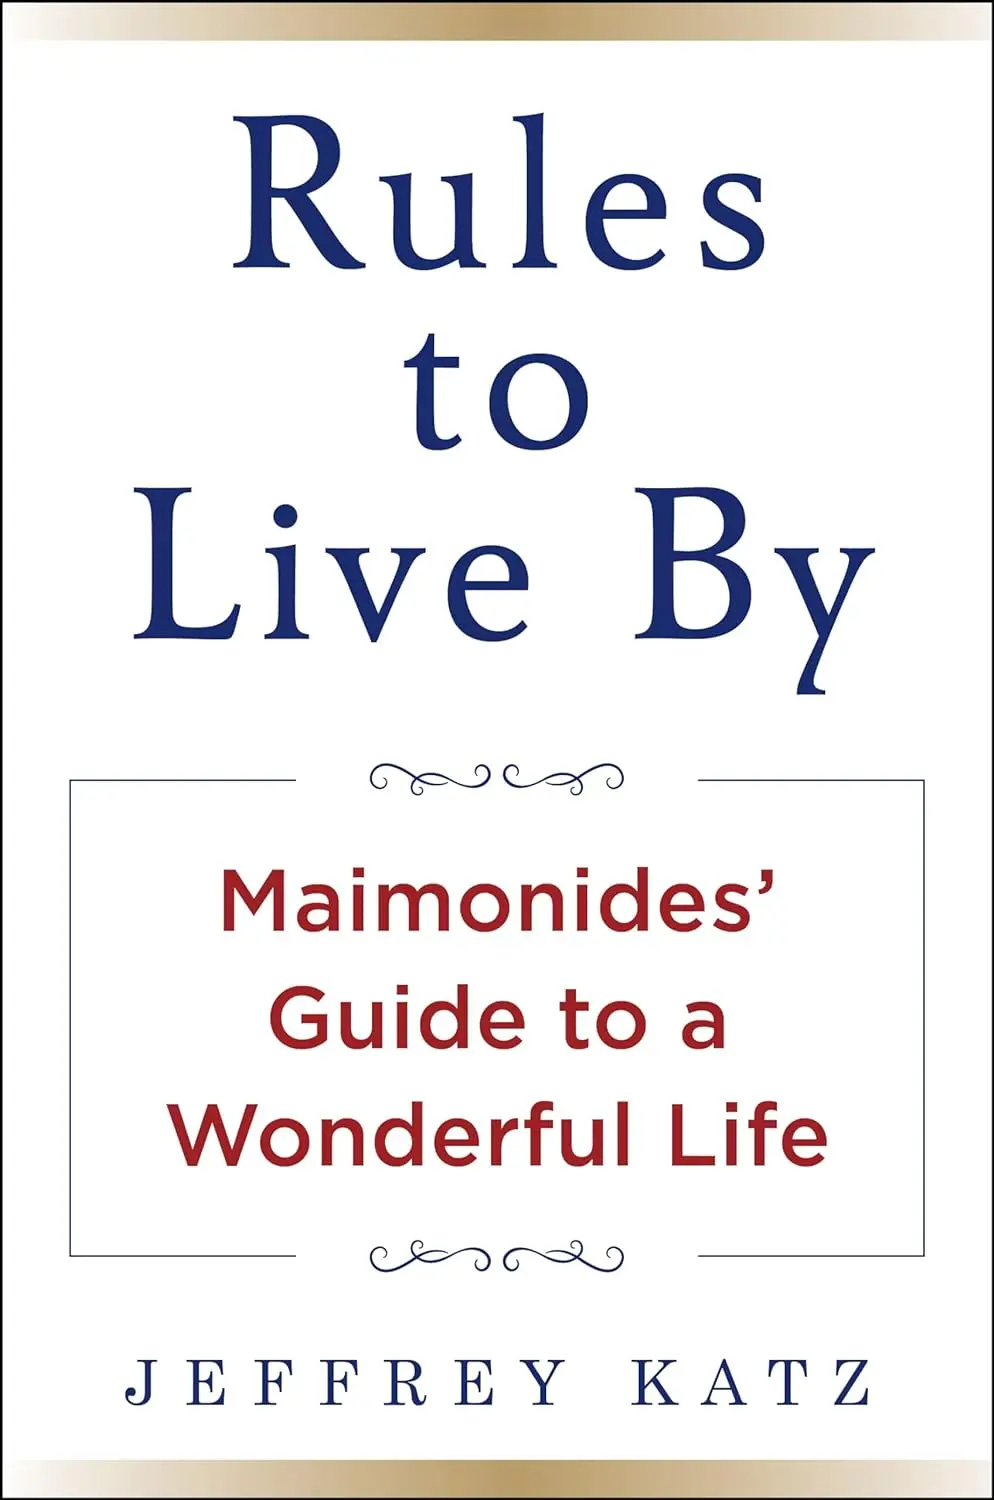 "Rules to Live By: Maimonides' Guide to a Wonderful Life," by Jeffrey Katz.